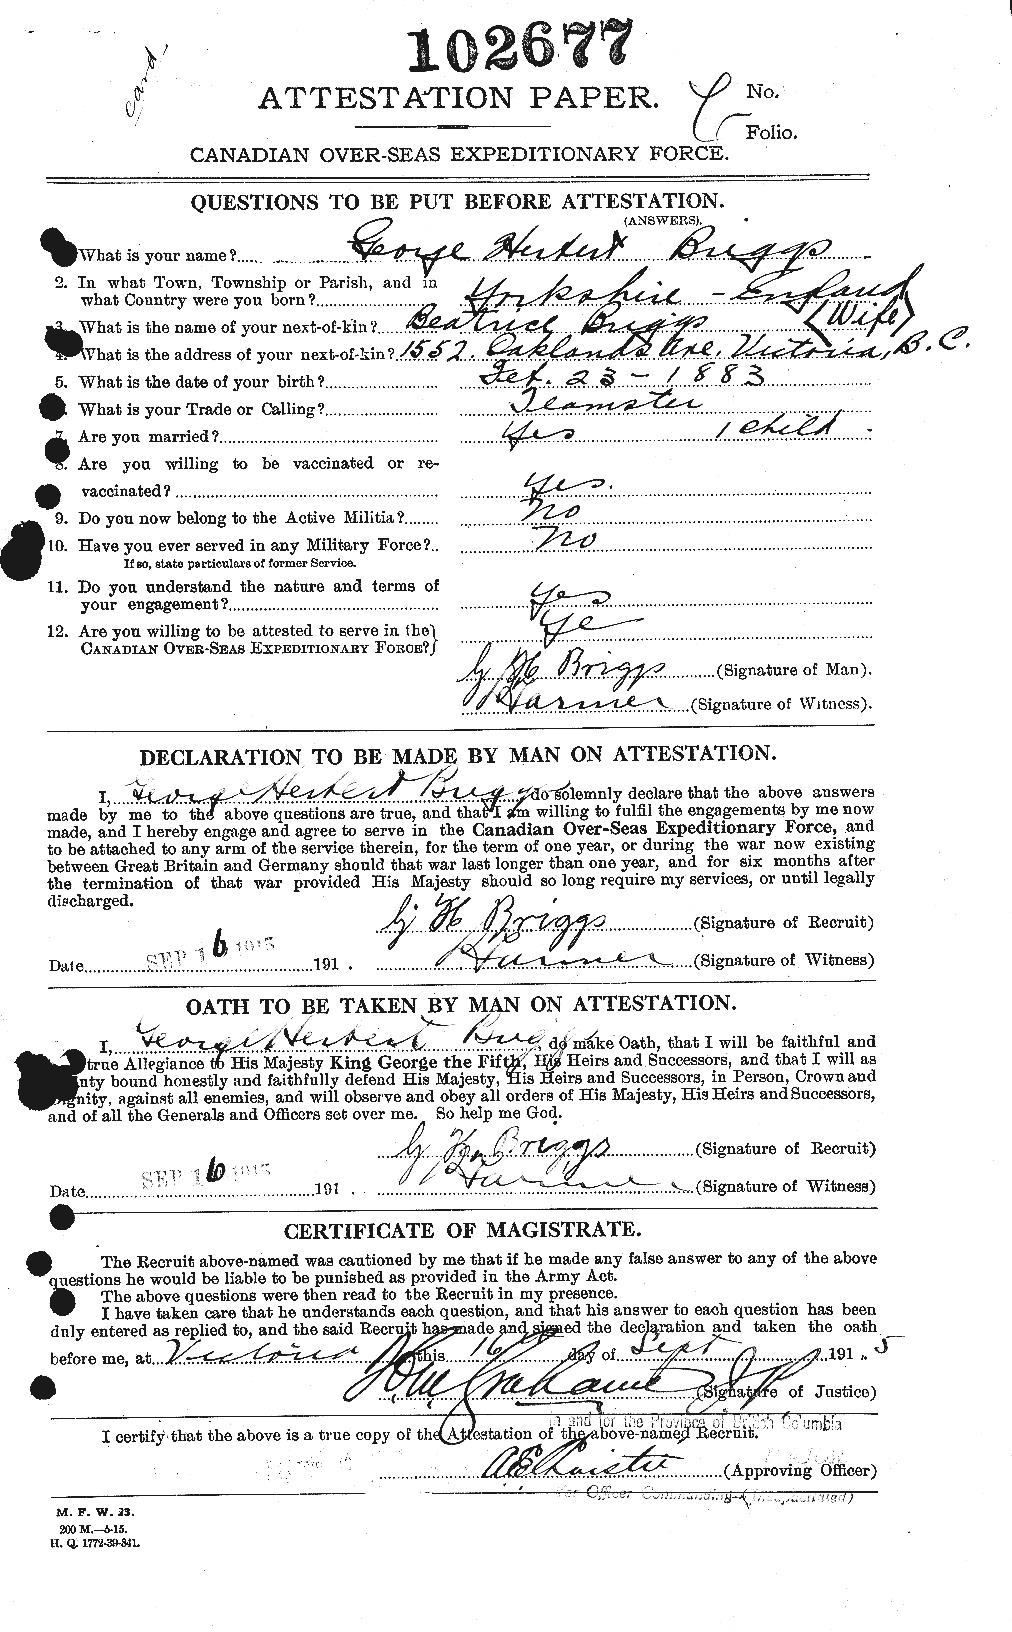 Personnel Records of the First World War - CEF 264016a